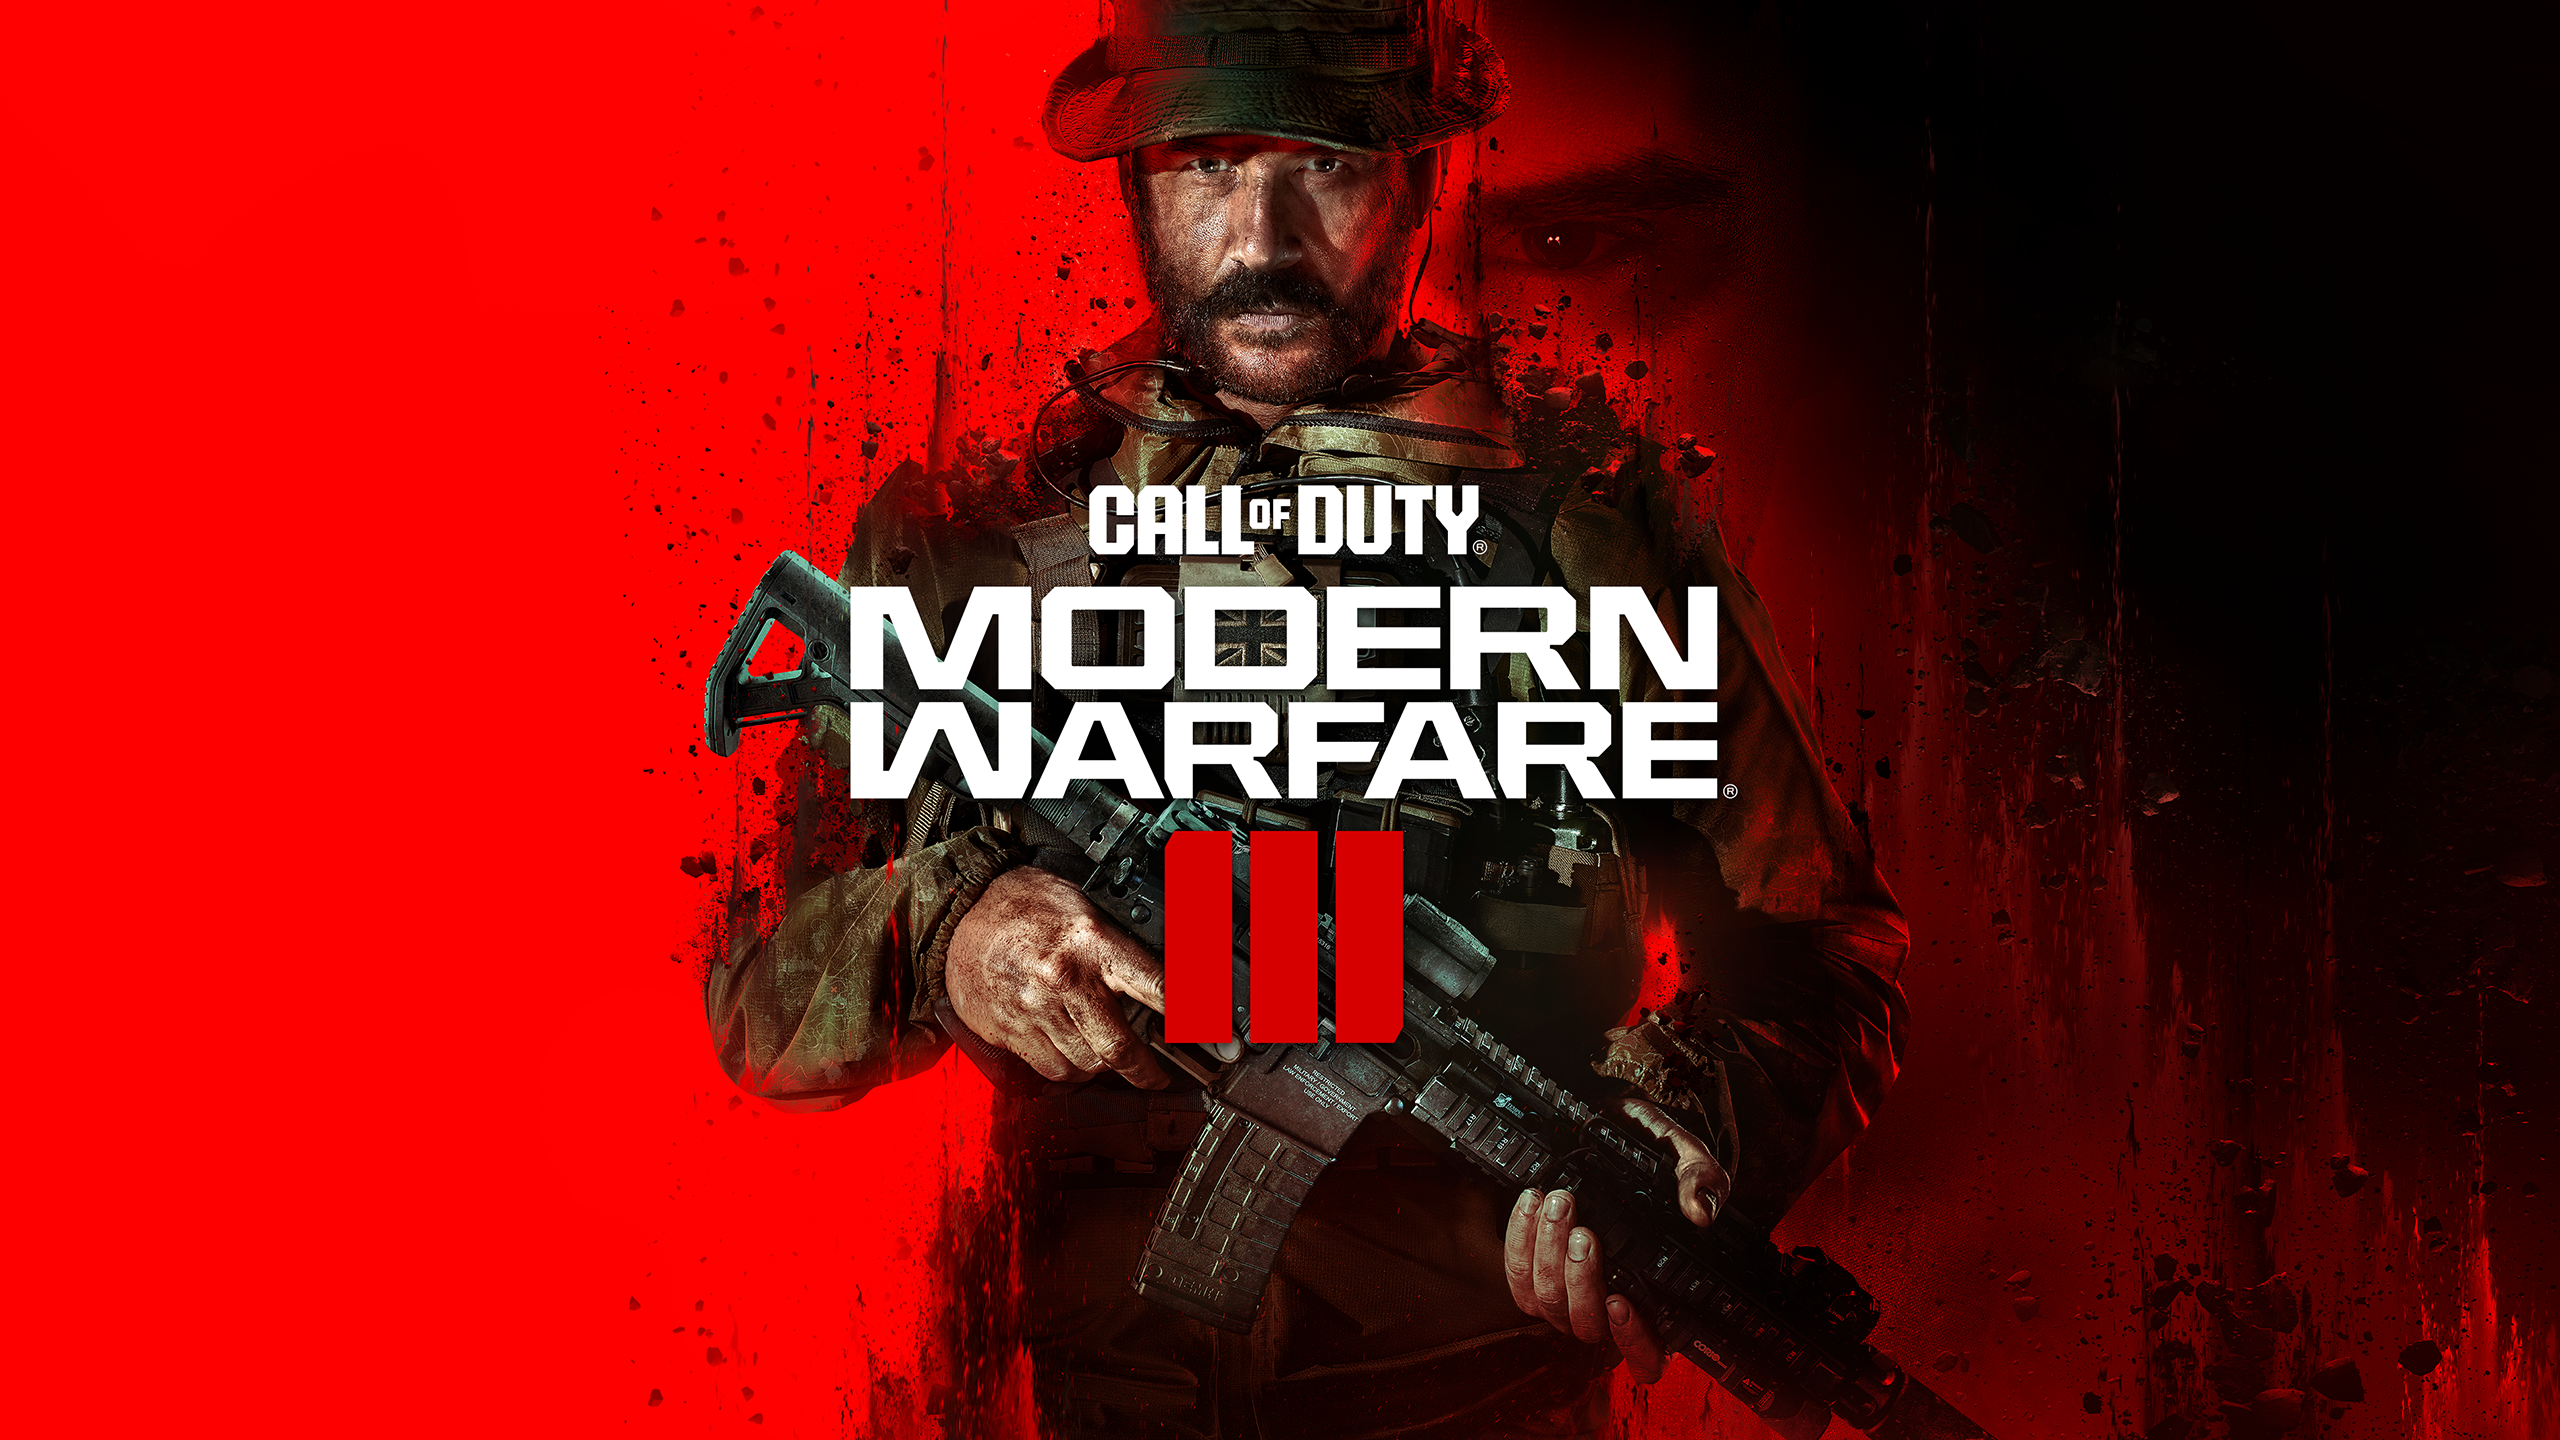 captain price holding a gun on a red background